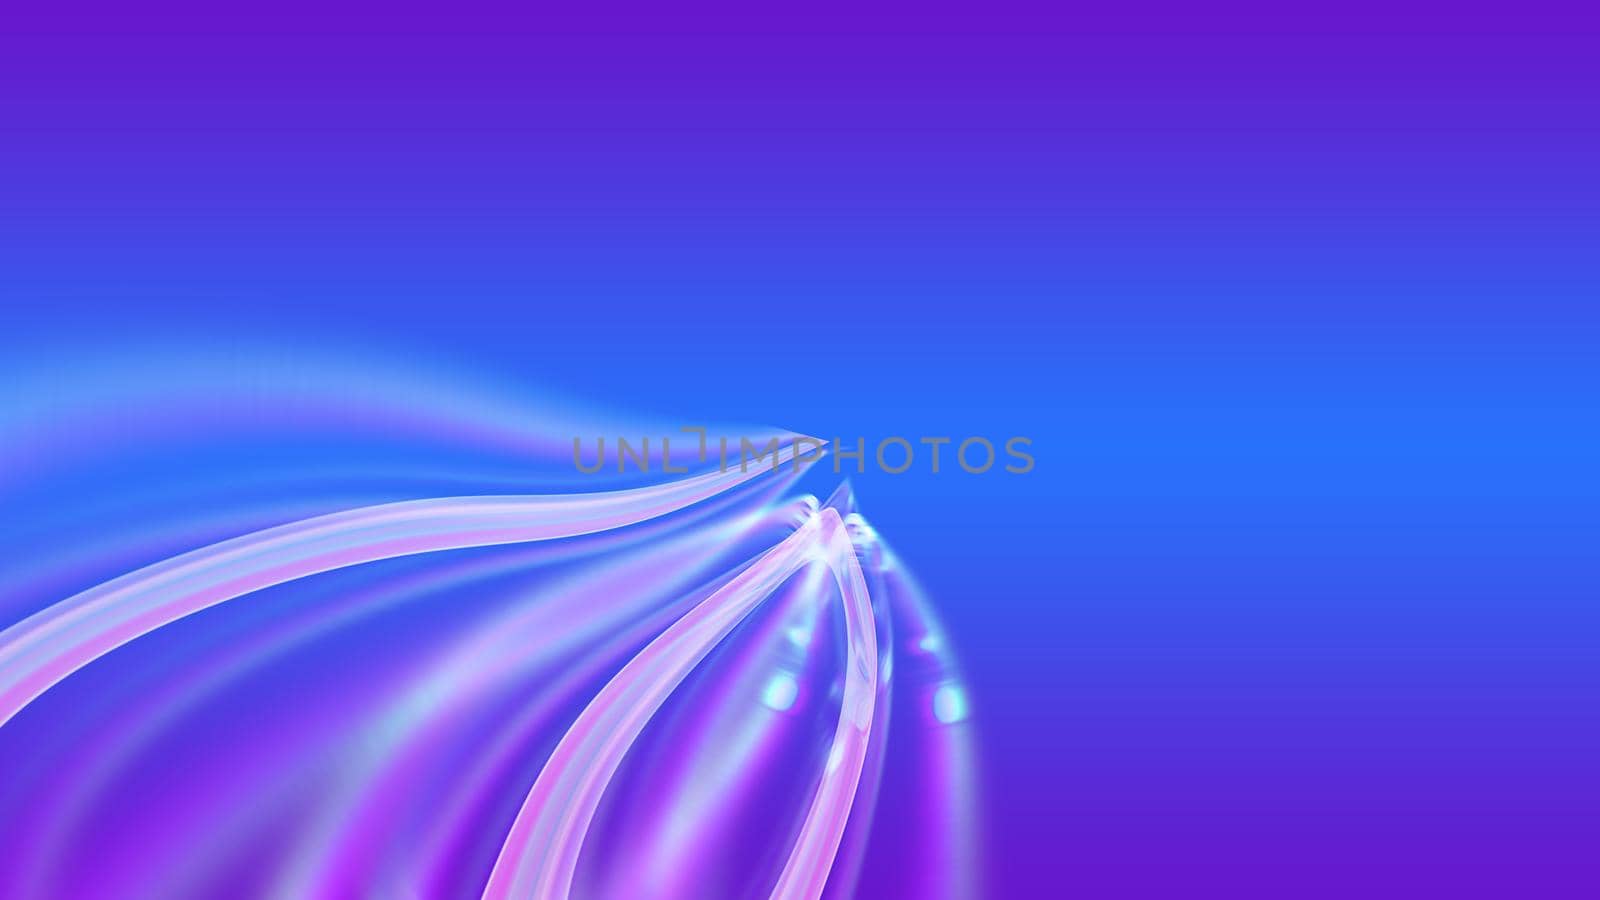 Abstract gradient background with a glowing figure.